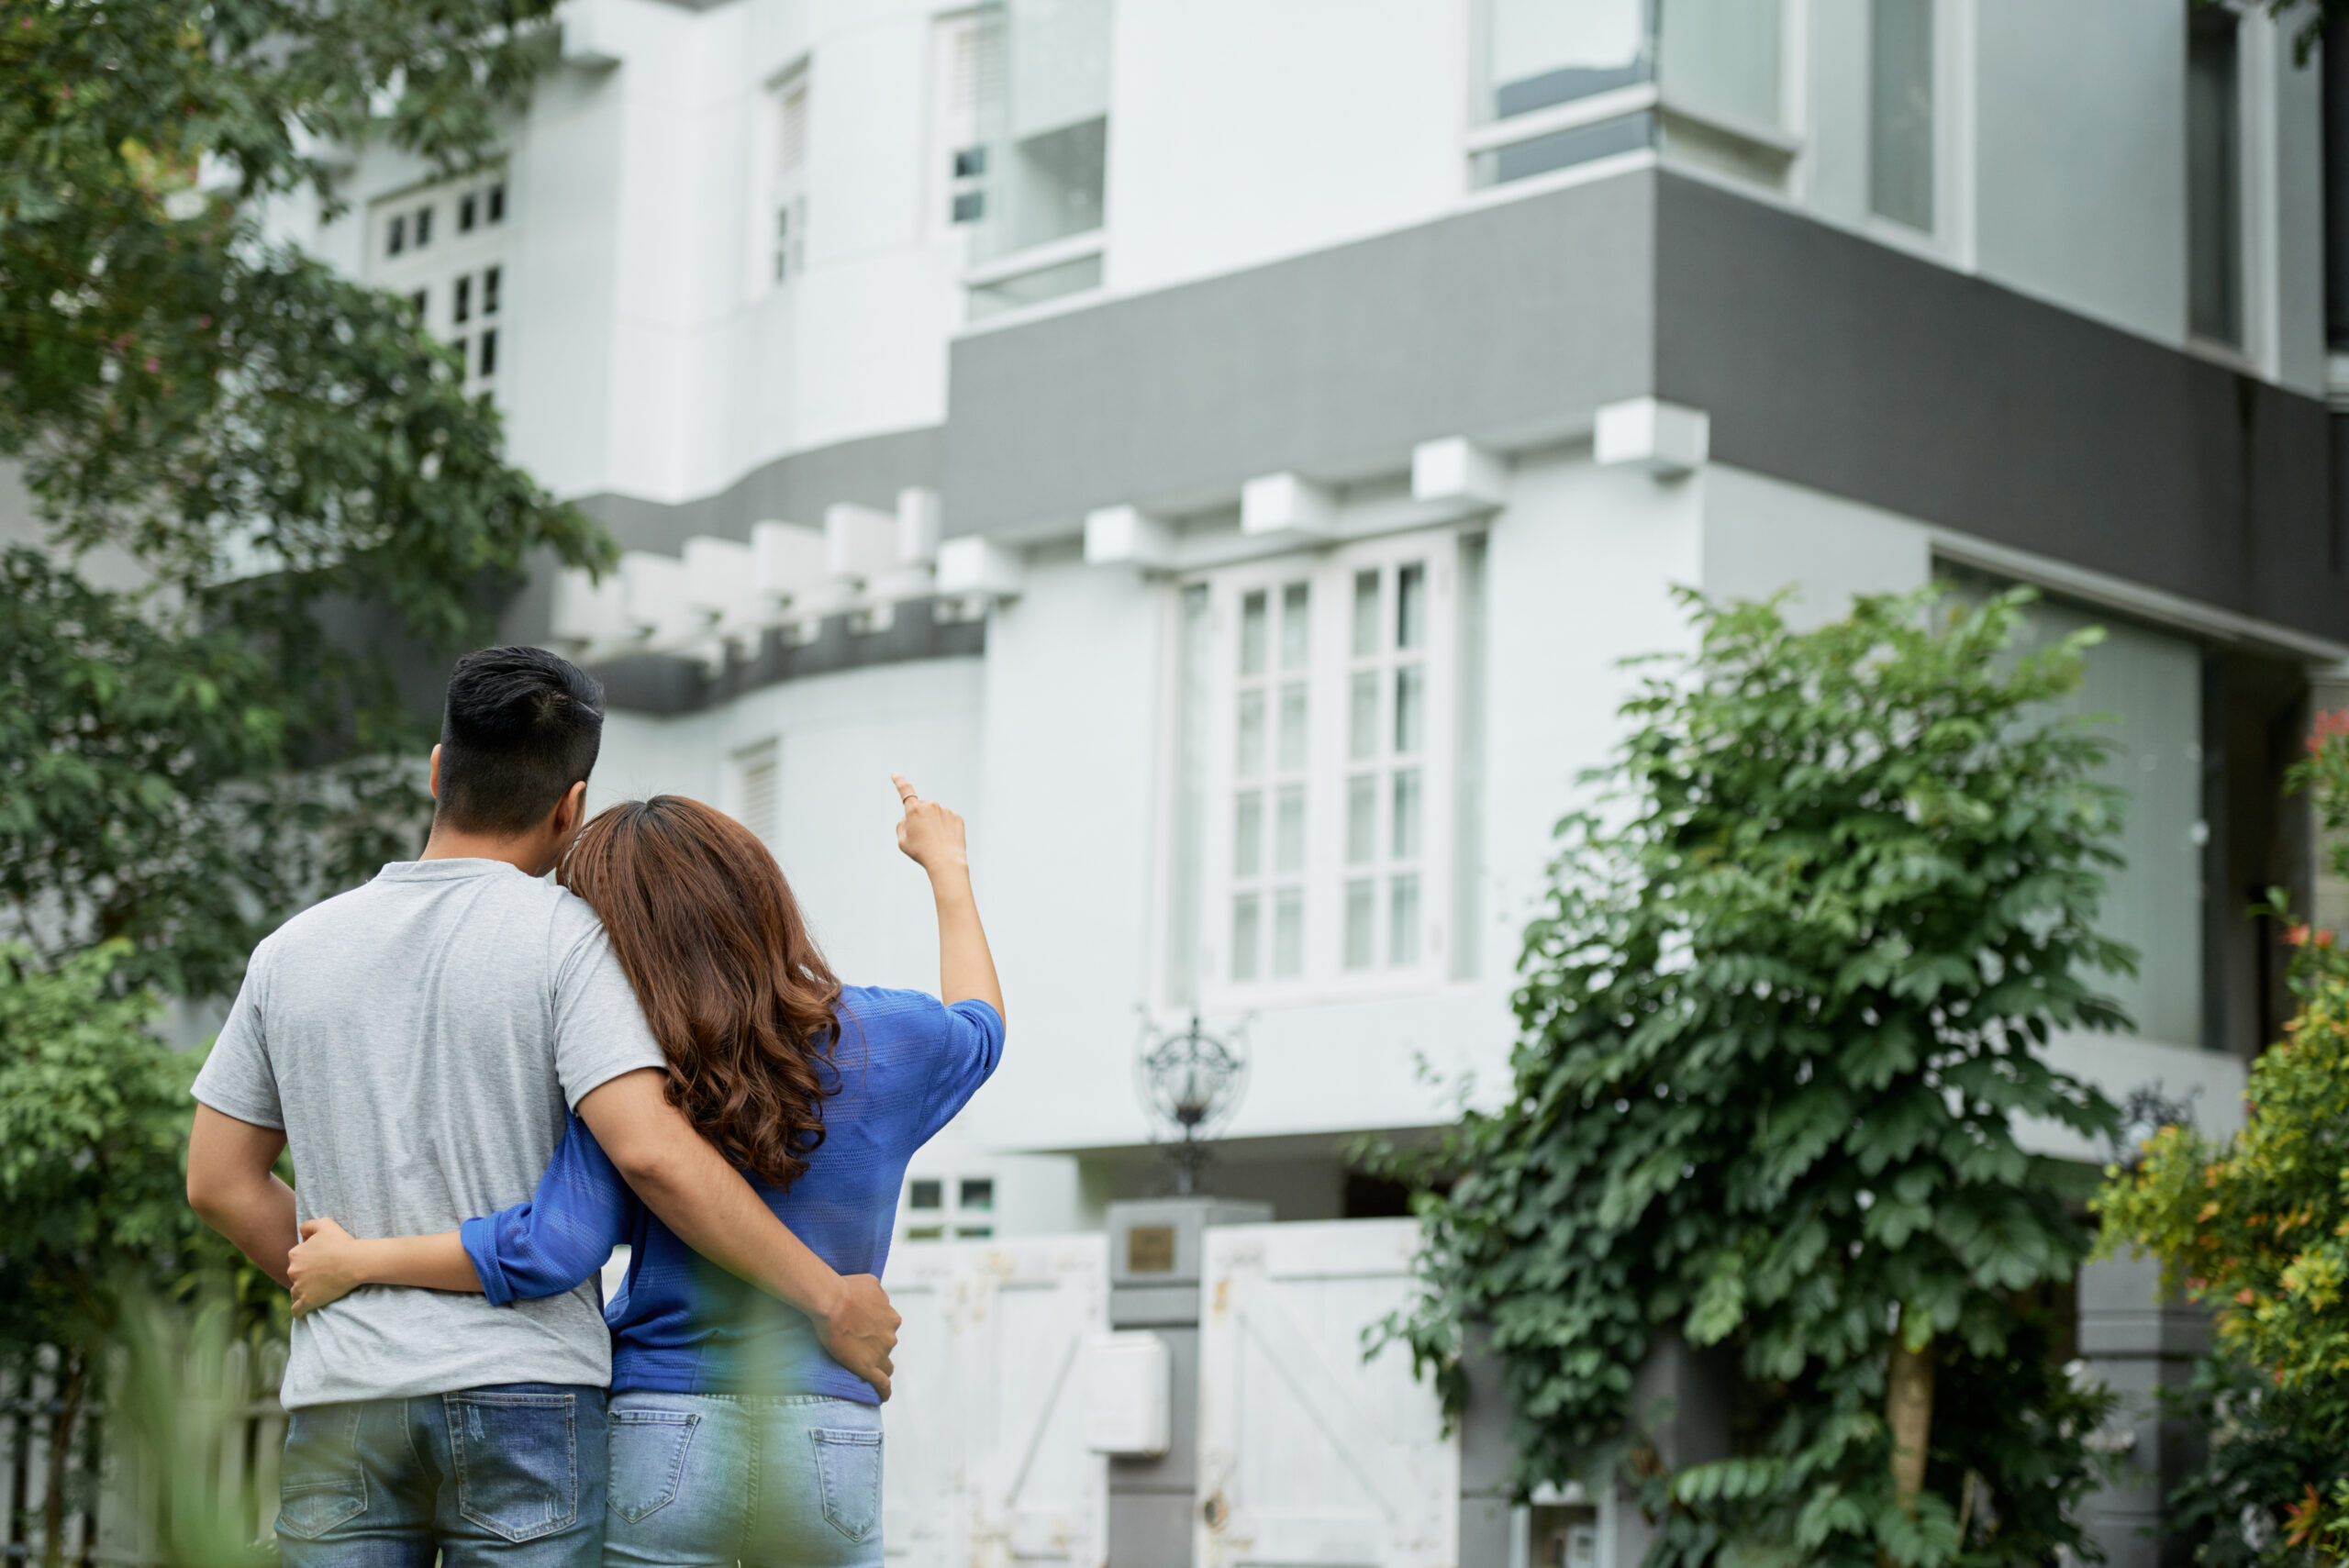 8 Essential Tips for First-Time Home Buyers in 2022